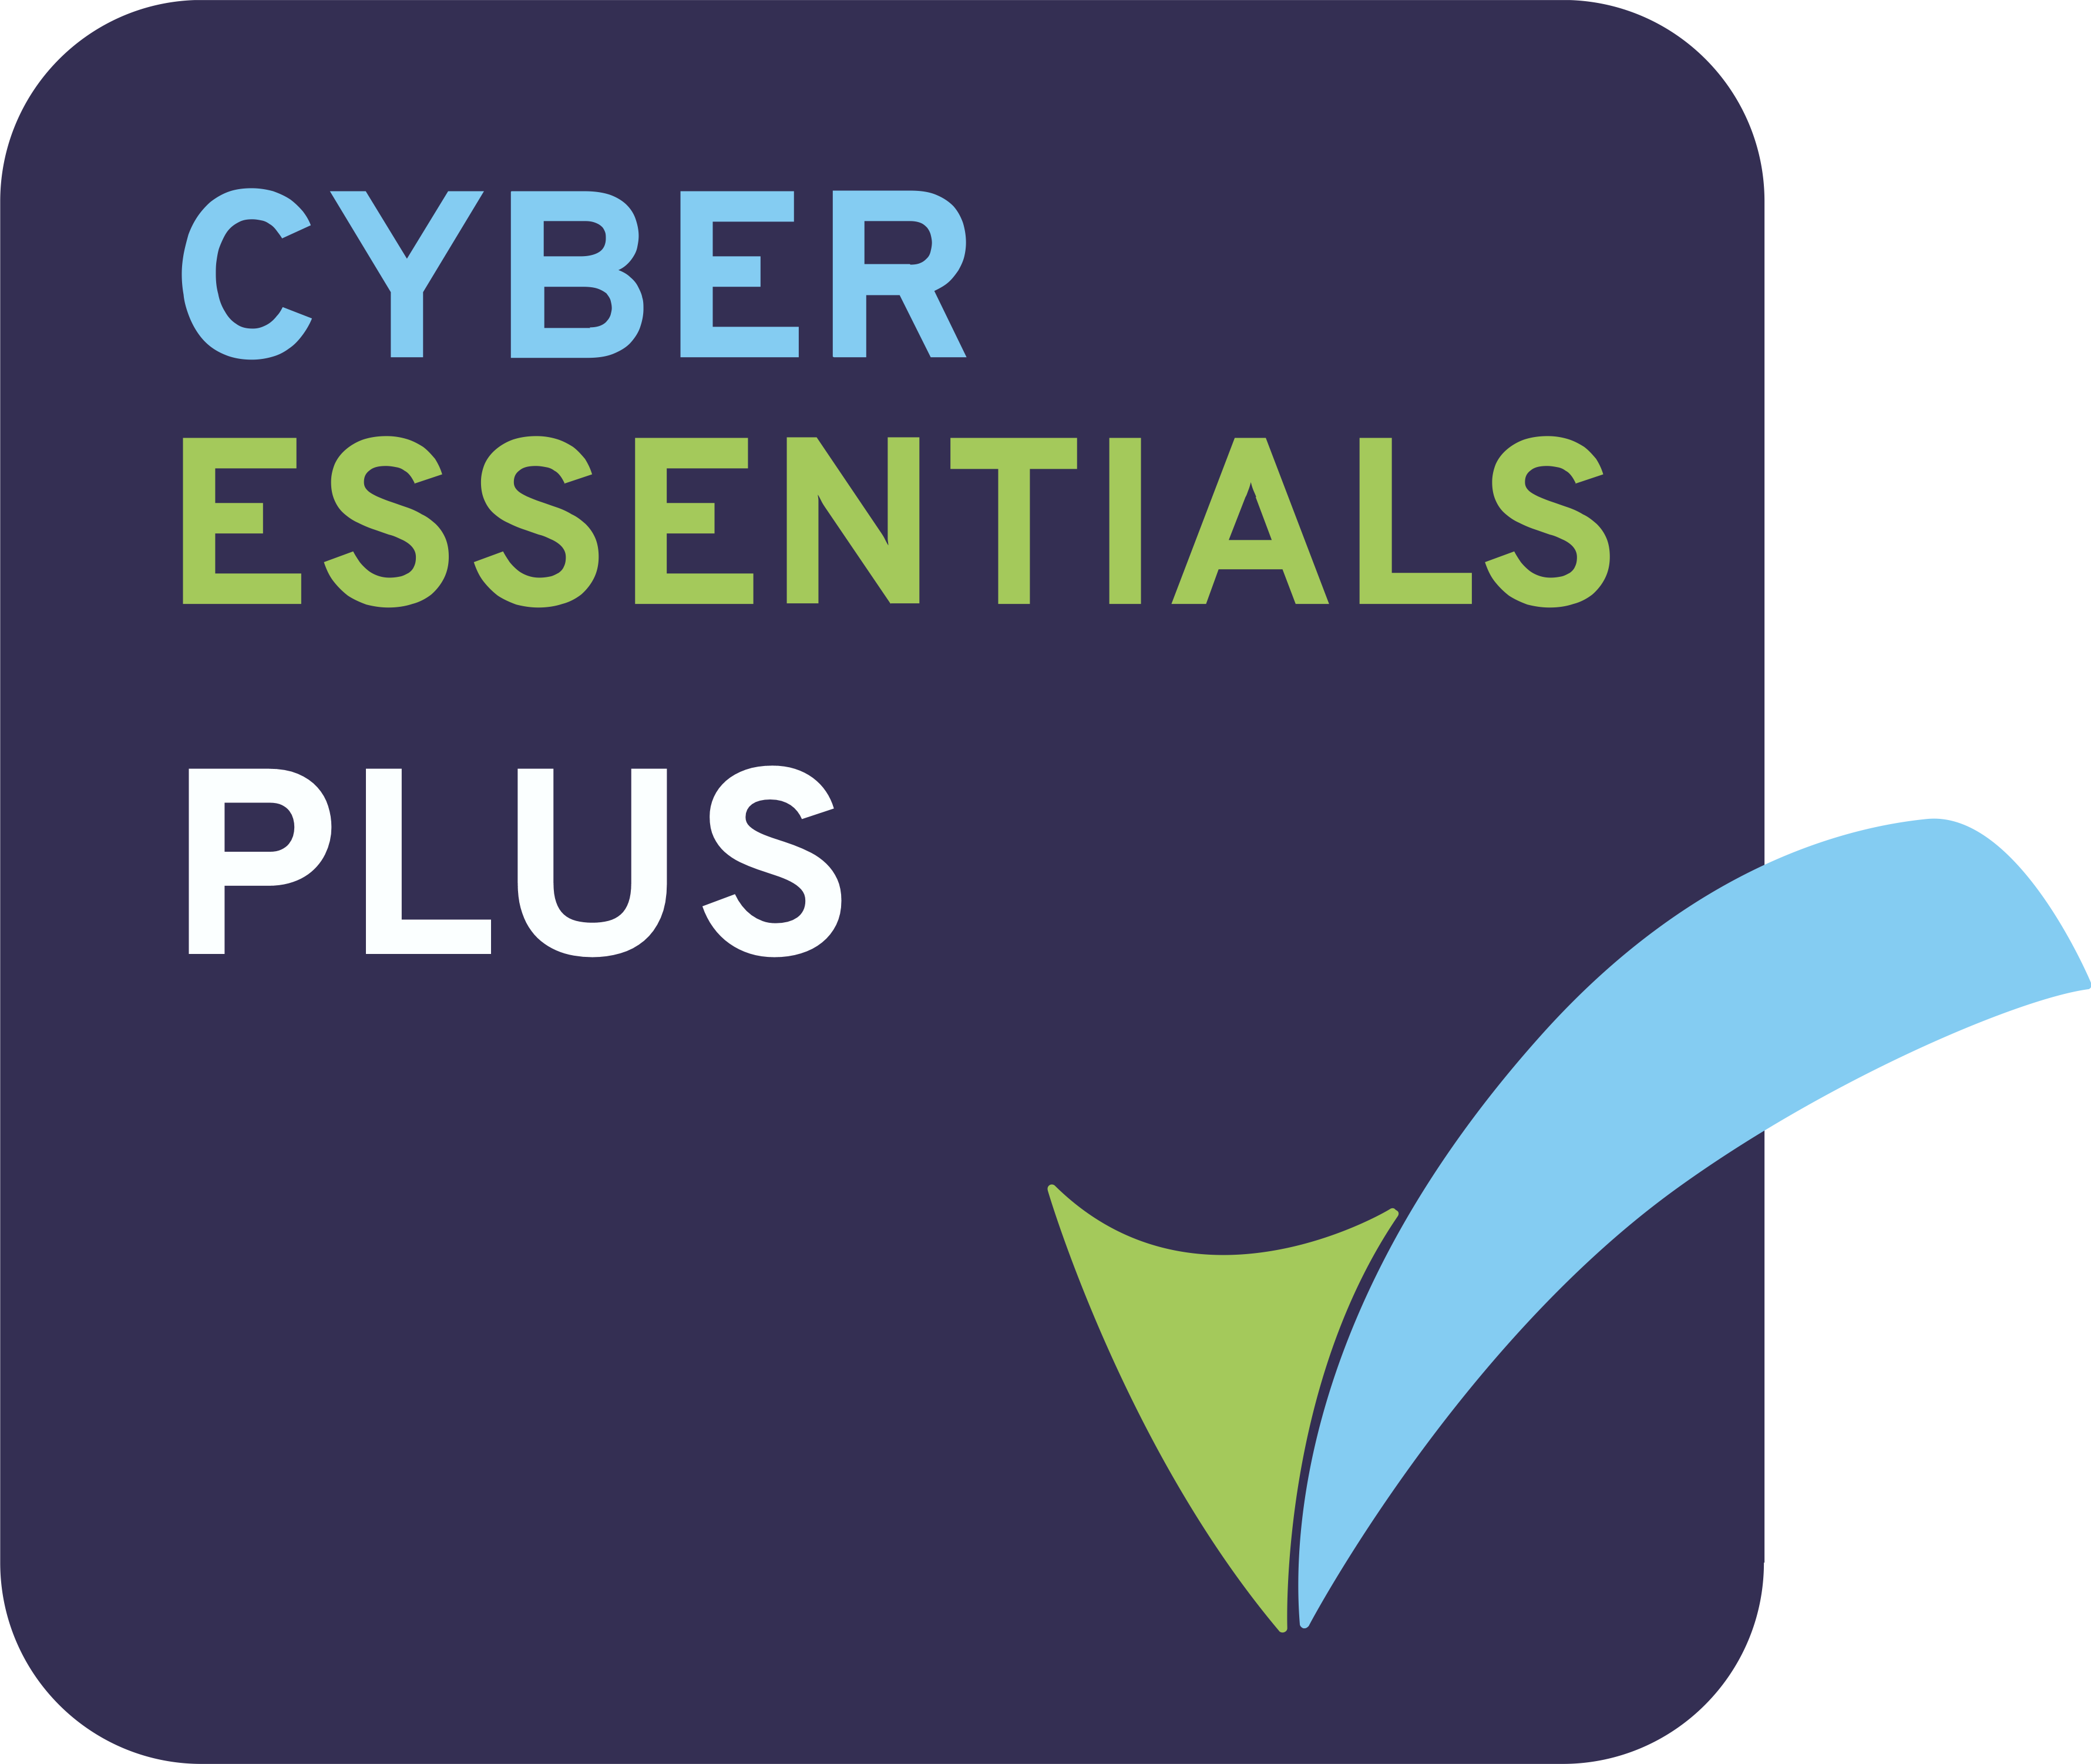 Viking Arms is Cyber Essentials Plus assured